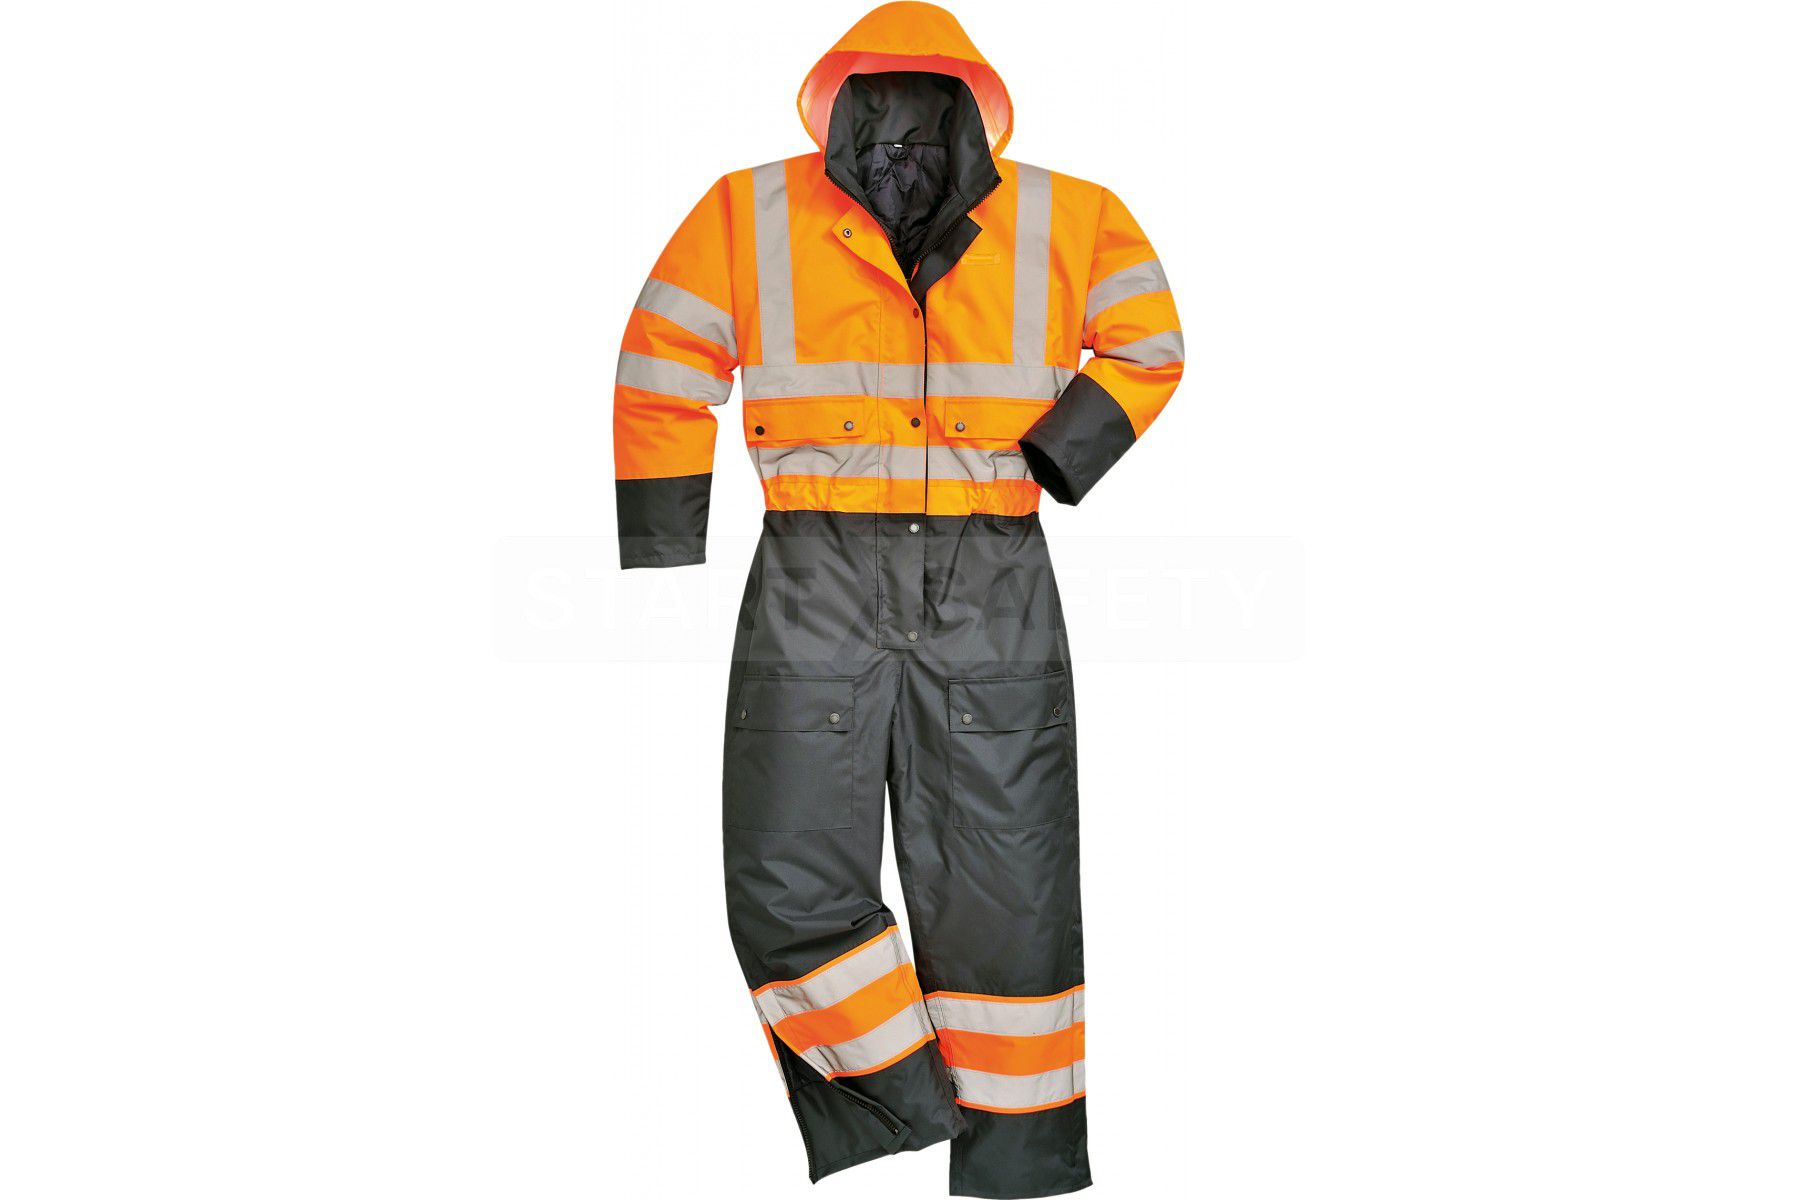 https://startsafety.com/image/cache/catalog/product/photo/portwest/US485/US485-ONR-high-visibility-contrast-coverall-lined-1800x1200_0.jpg